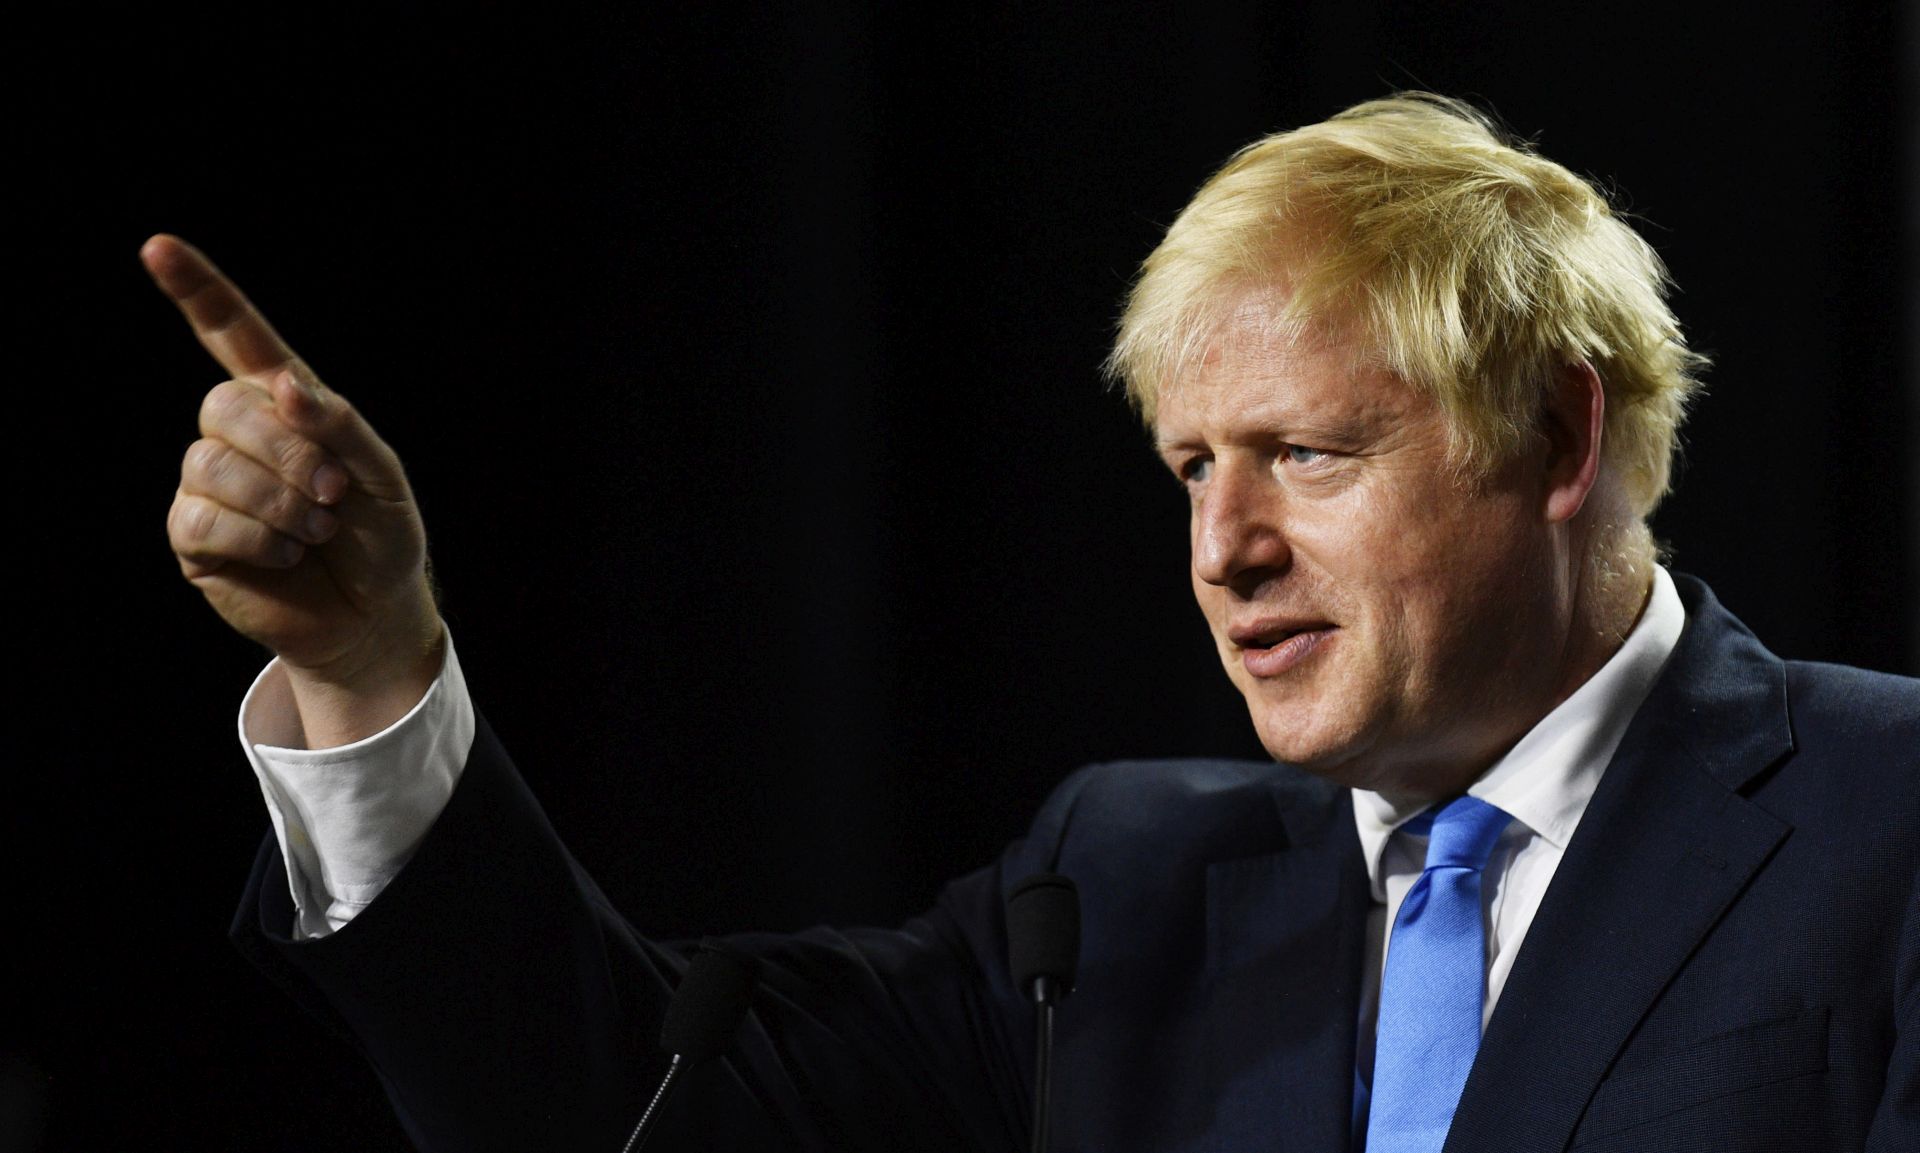 epa07798883 (FILE) - Britain's Prime Minister Boris Johnson speaks at a press conference at the G7 summit in Biarritz, France, 26 August 2019 (reissued 28 August 2019). According to reports, British government has formally requested the intervention of the Queen in a bid to suspend parliament. A government source said the government's intention is to suspend parliament and hold a Queen's speech 14 October, setting out the future plans of a post-Brexit government.  EPA/NEIL HALL